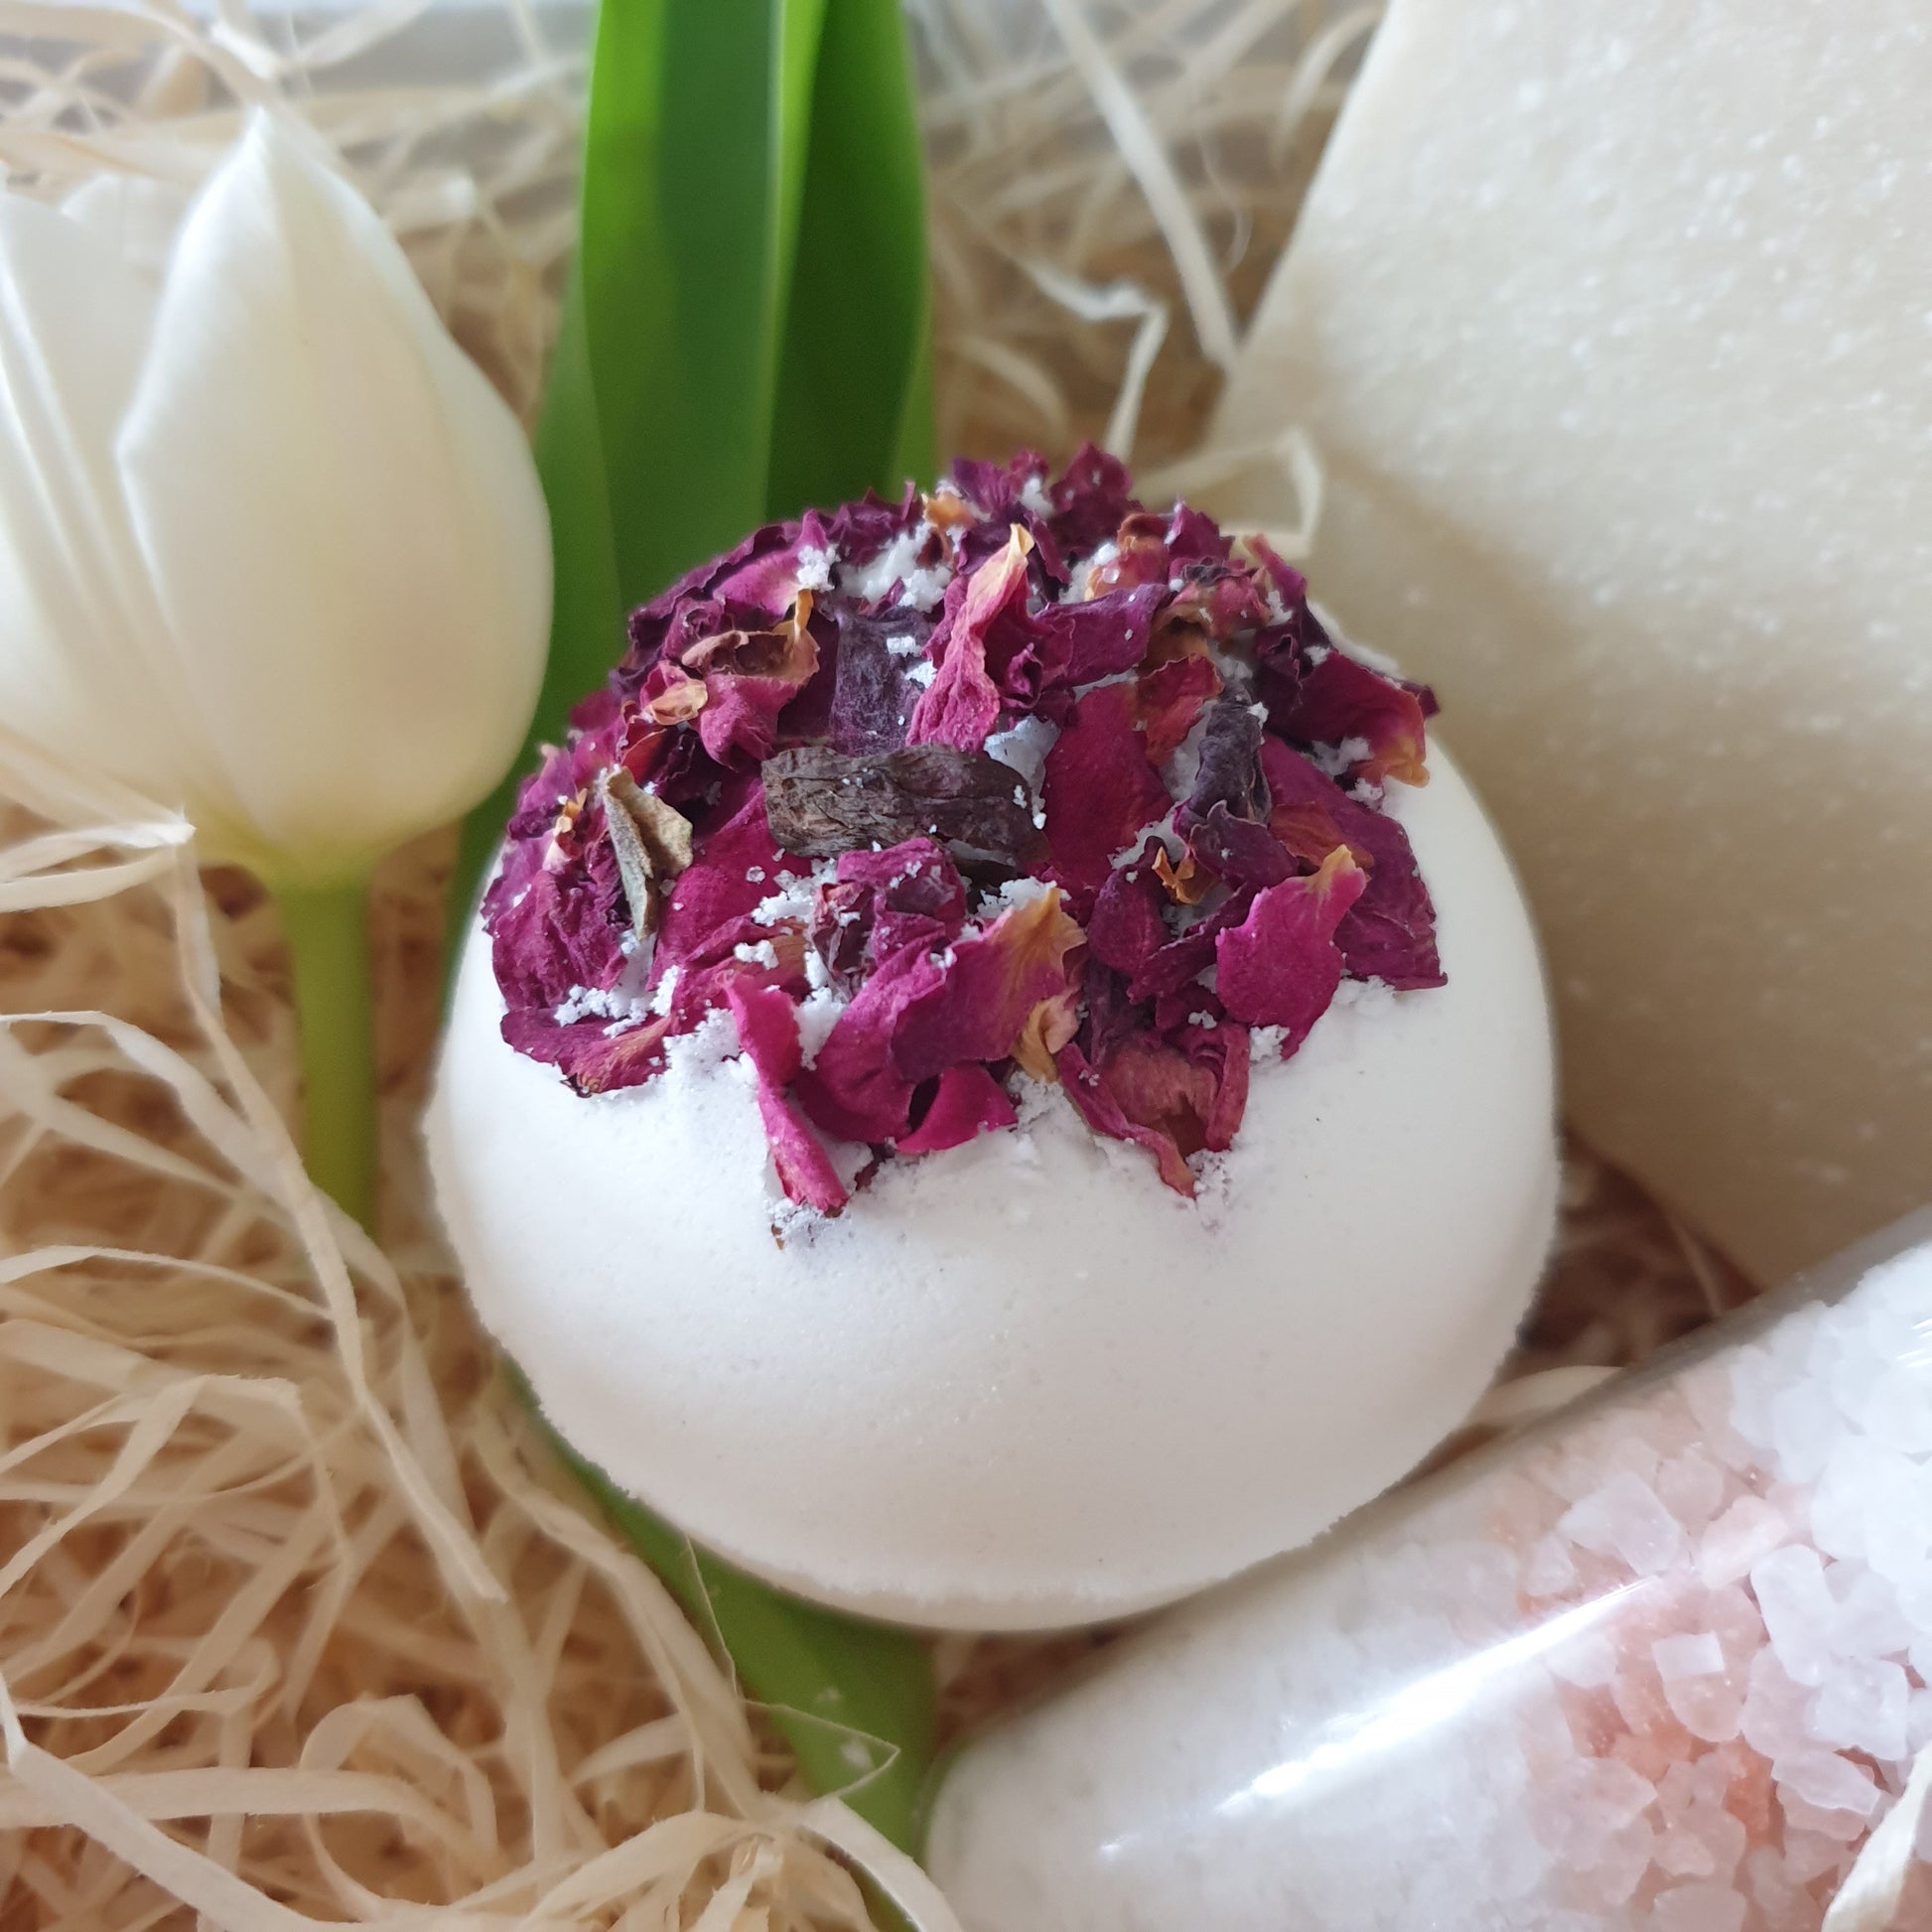 Rose and Sandalwood Secret Bath Bomb along with other products by The Eden Collections.